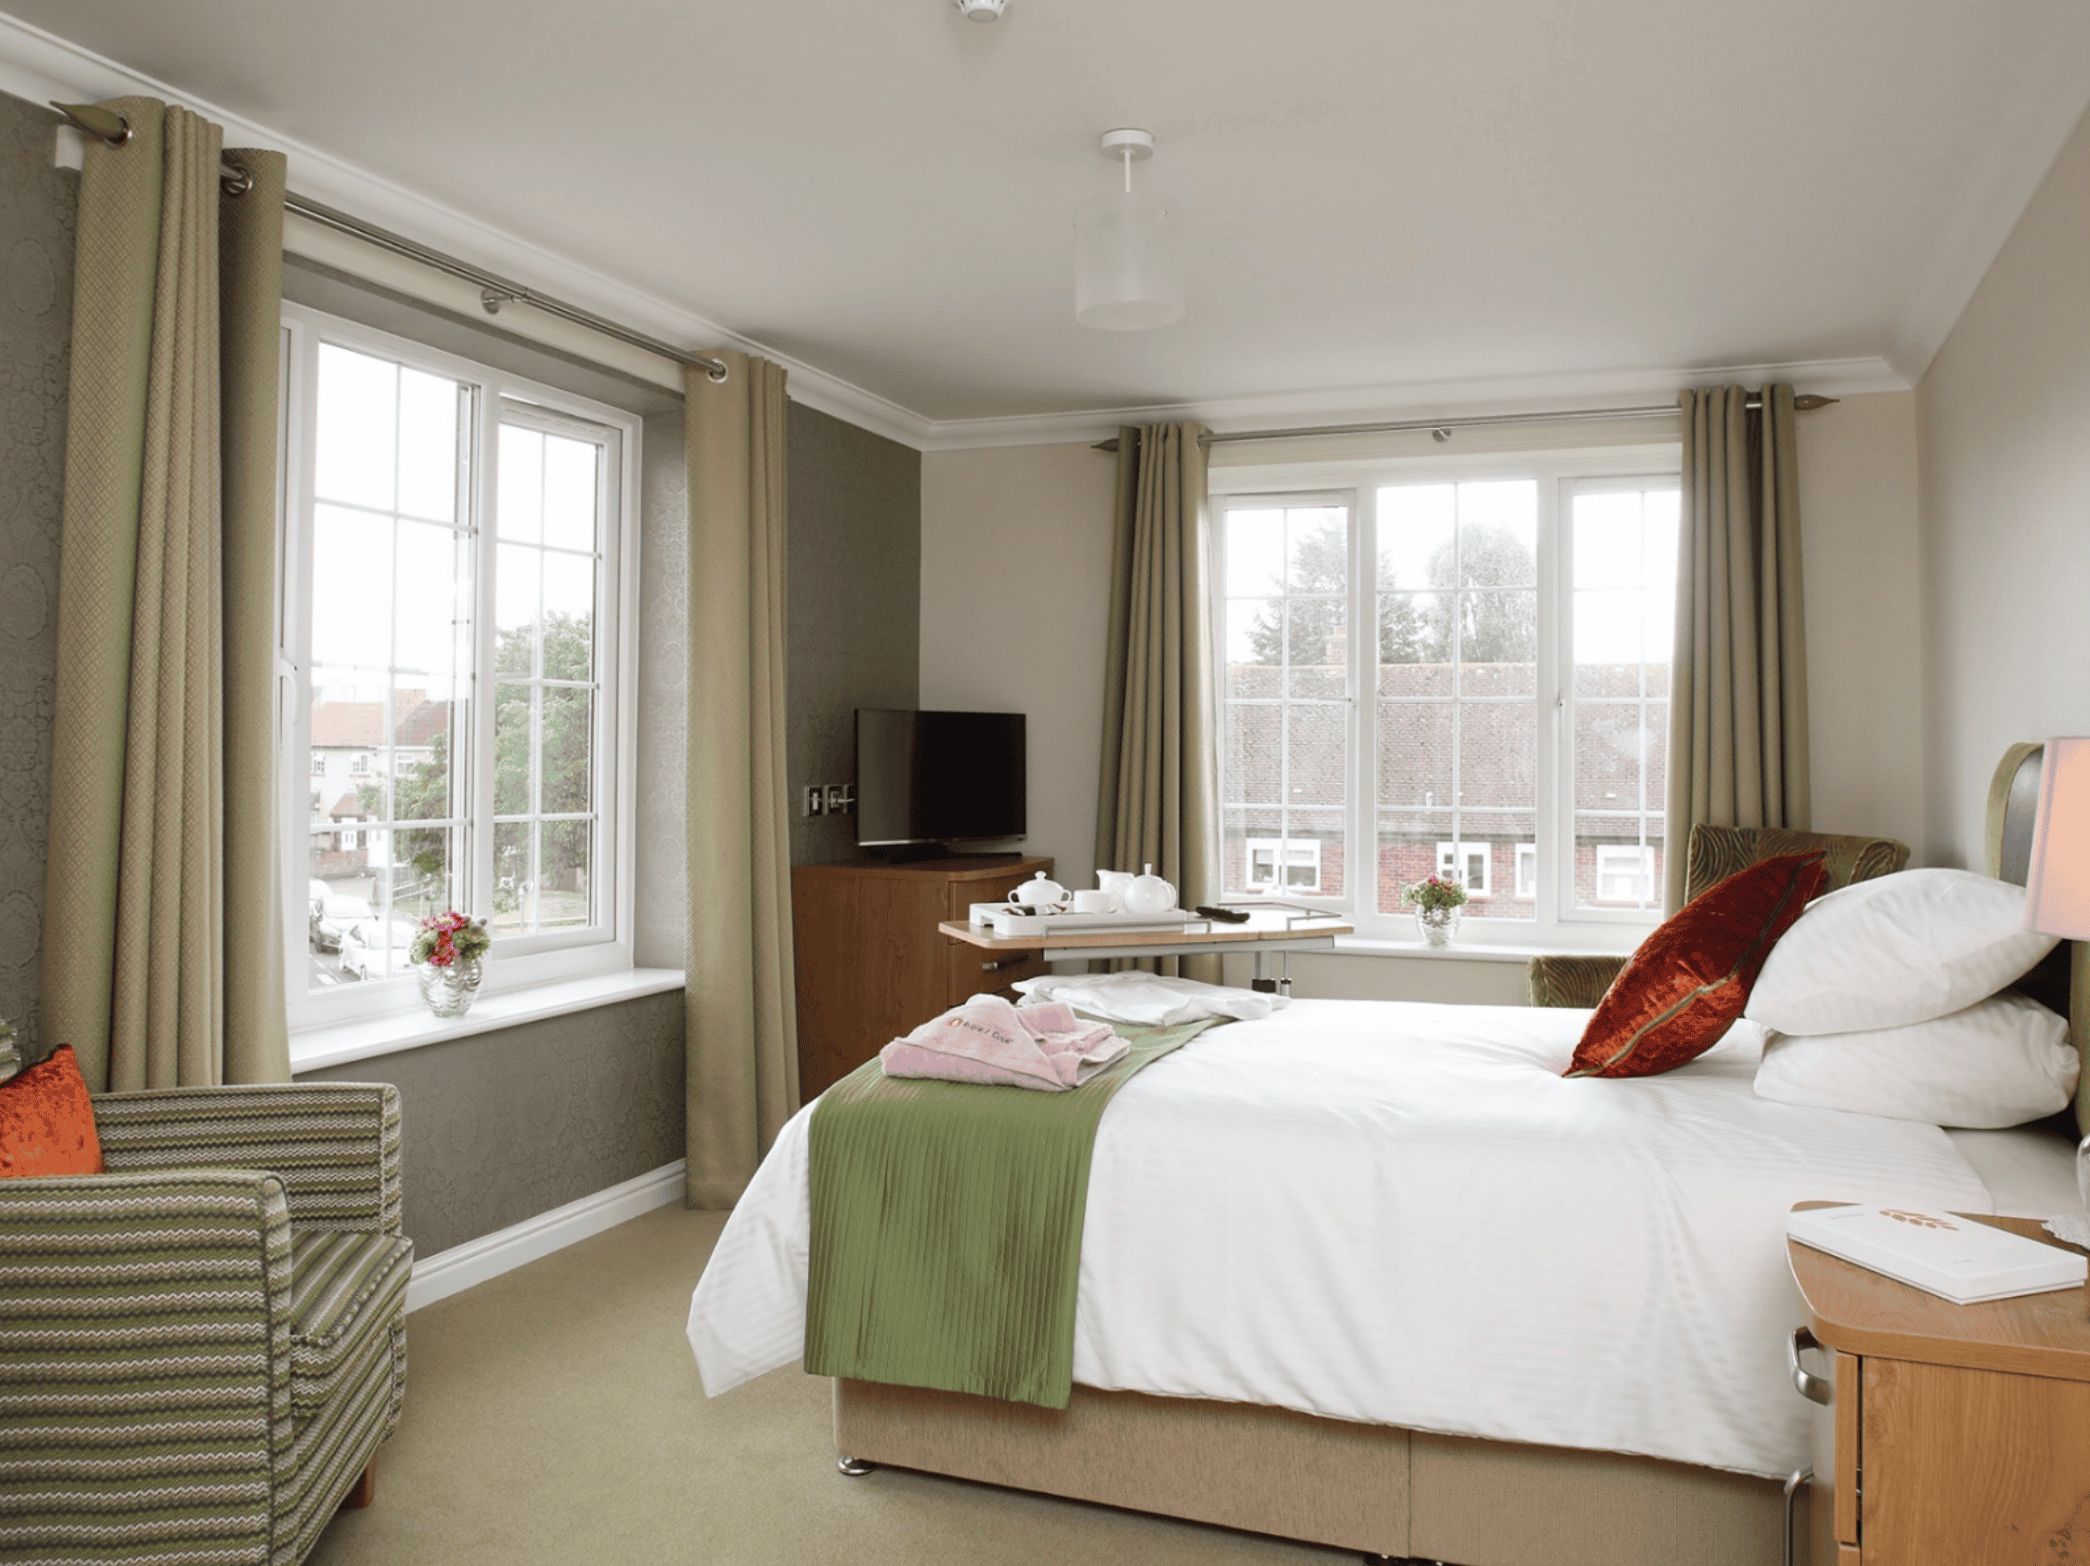 Bedroom of  Ryefield Court care home in Harrow, London